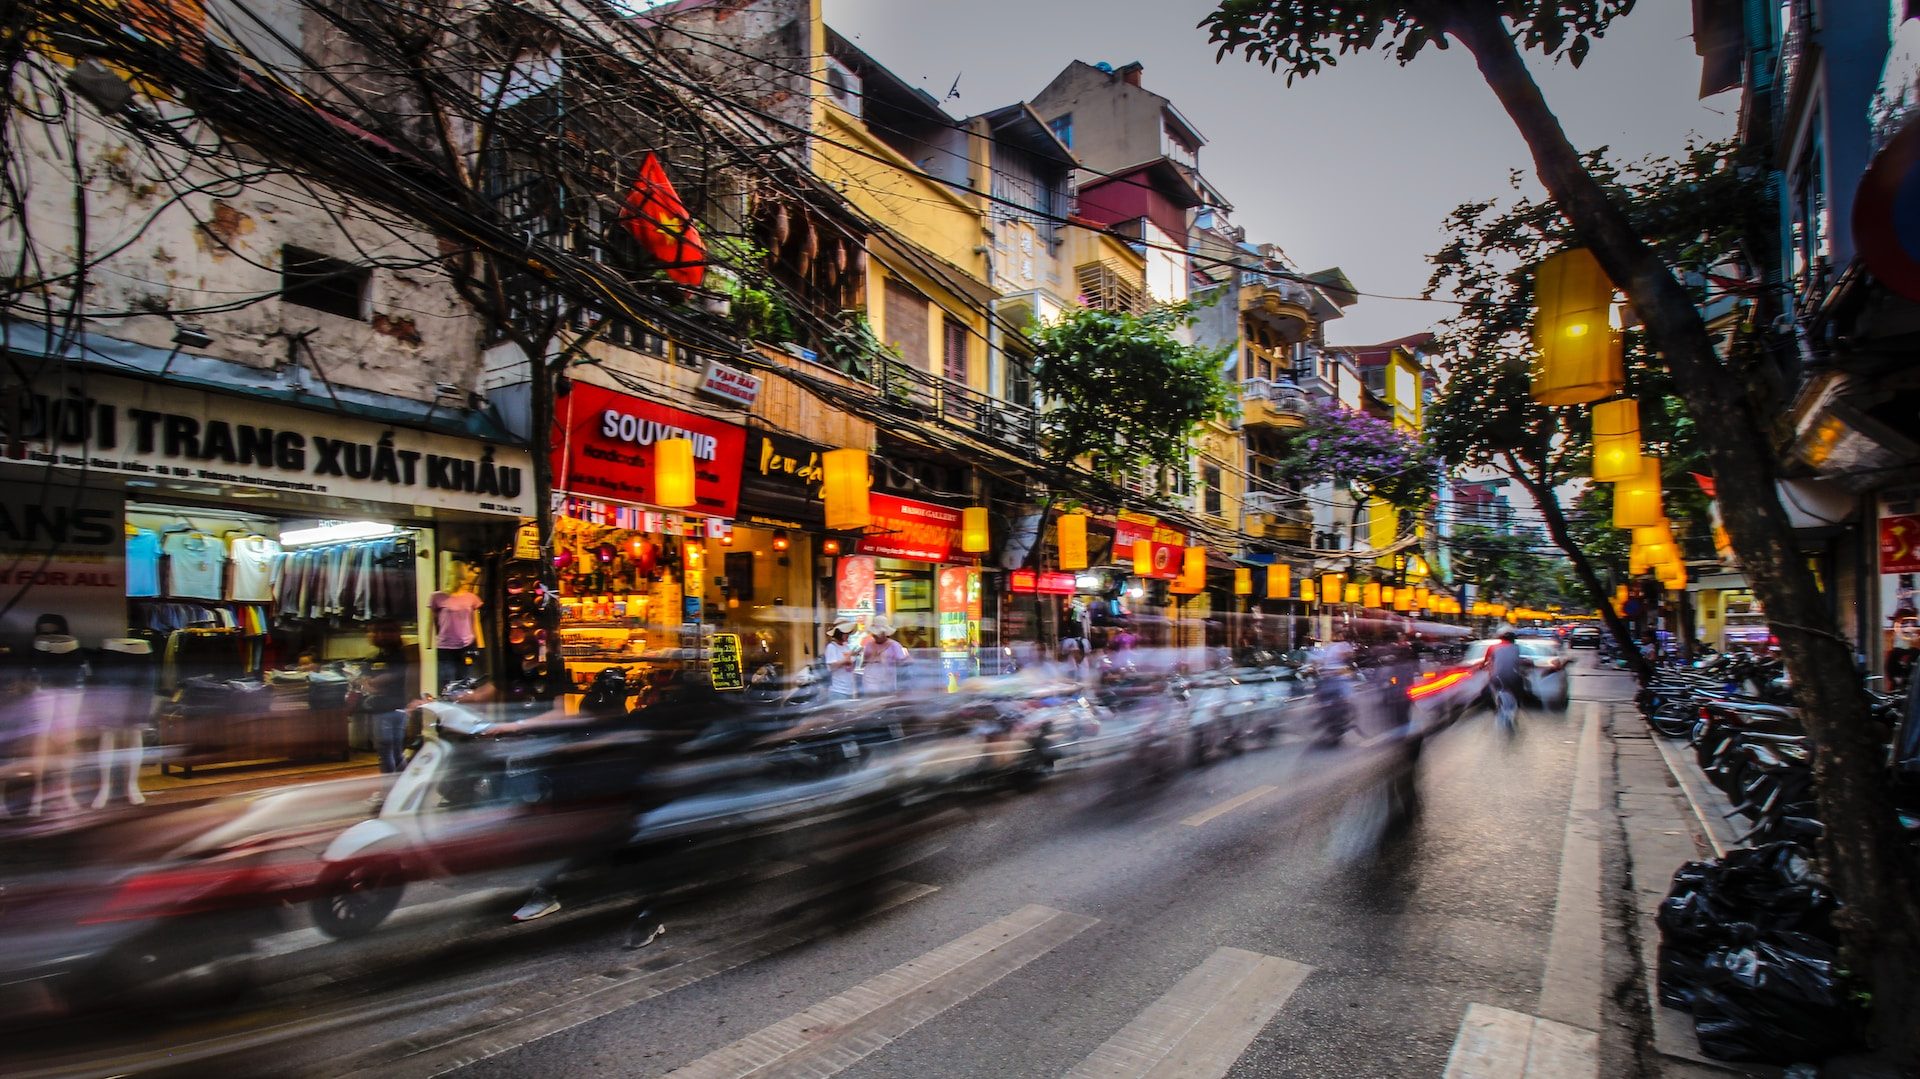 Vietnam's landscape street with traffic in front of company shops